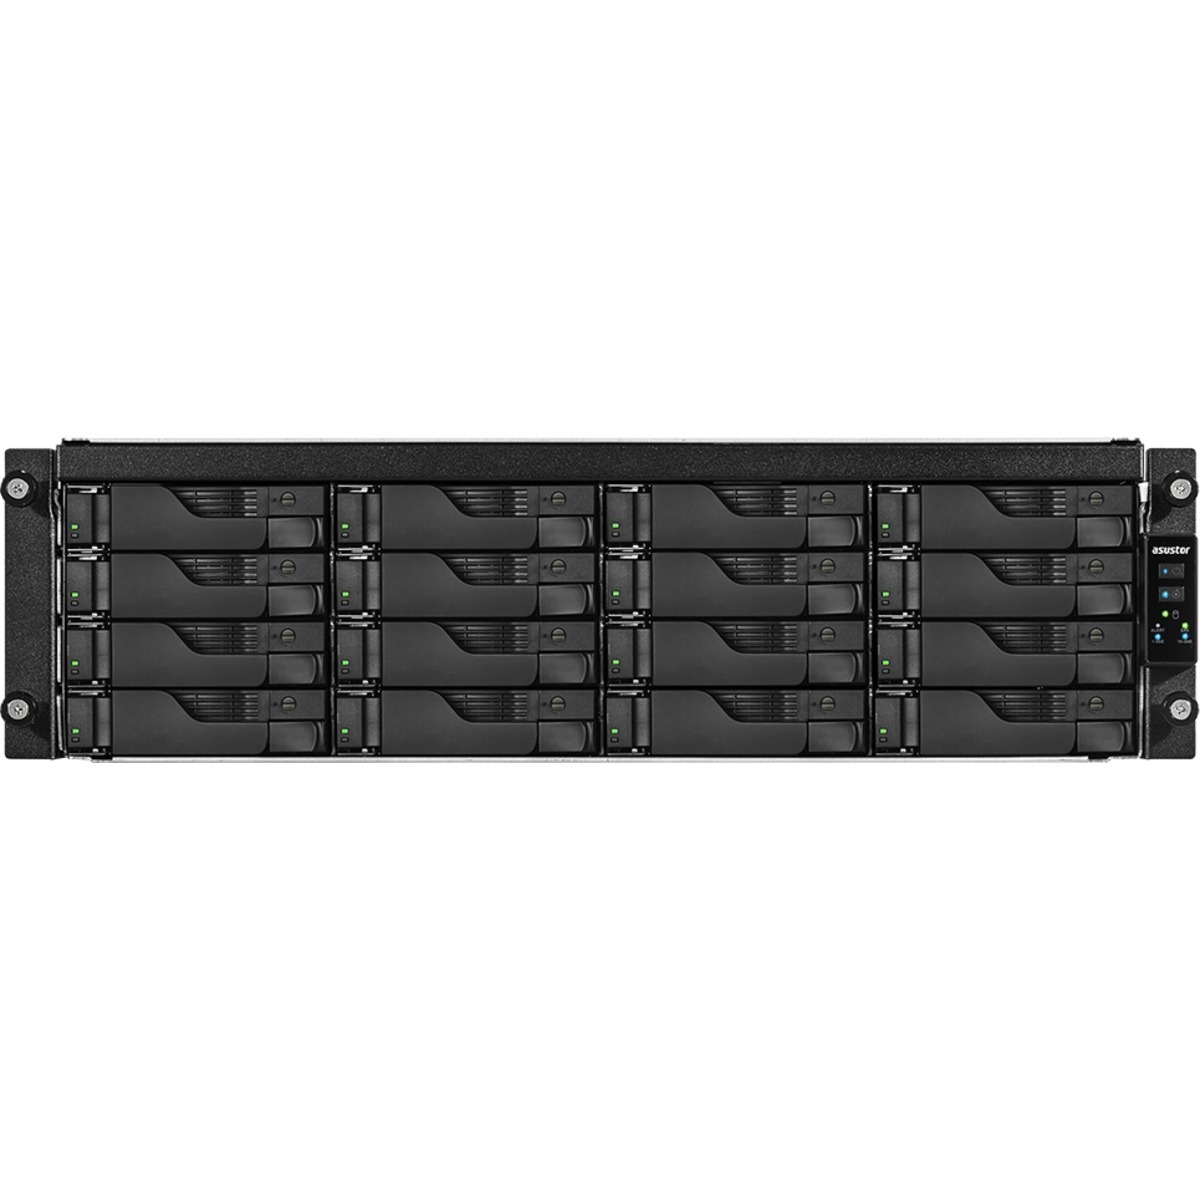 buy $7193 ASUSTOR AS7116RDX Lockerstor 16R Pro 32tb RackMount NAS - Network Attached Storage Device 16x2000gb Seagate BarraCuda ST2000DM008 3.5 7200rpm SATA 6Gb/s HDD CONSUMER Class Drives Installed - Burn-In Tested - ON SALE - nas headquarters buy network attached storage server device das new raid-5 free shipping usa christmas new year holiday sale AS7116RDX Lockerstor 16R Pro